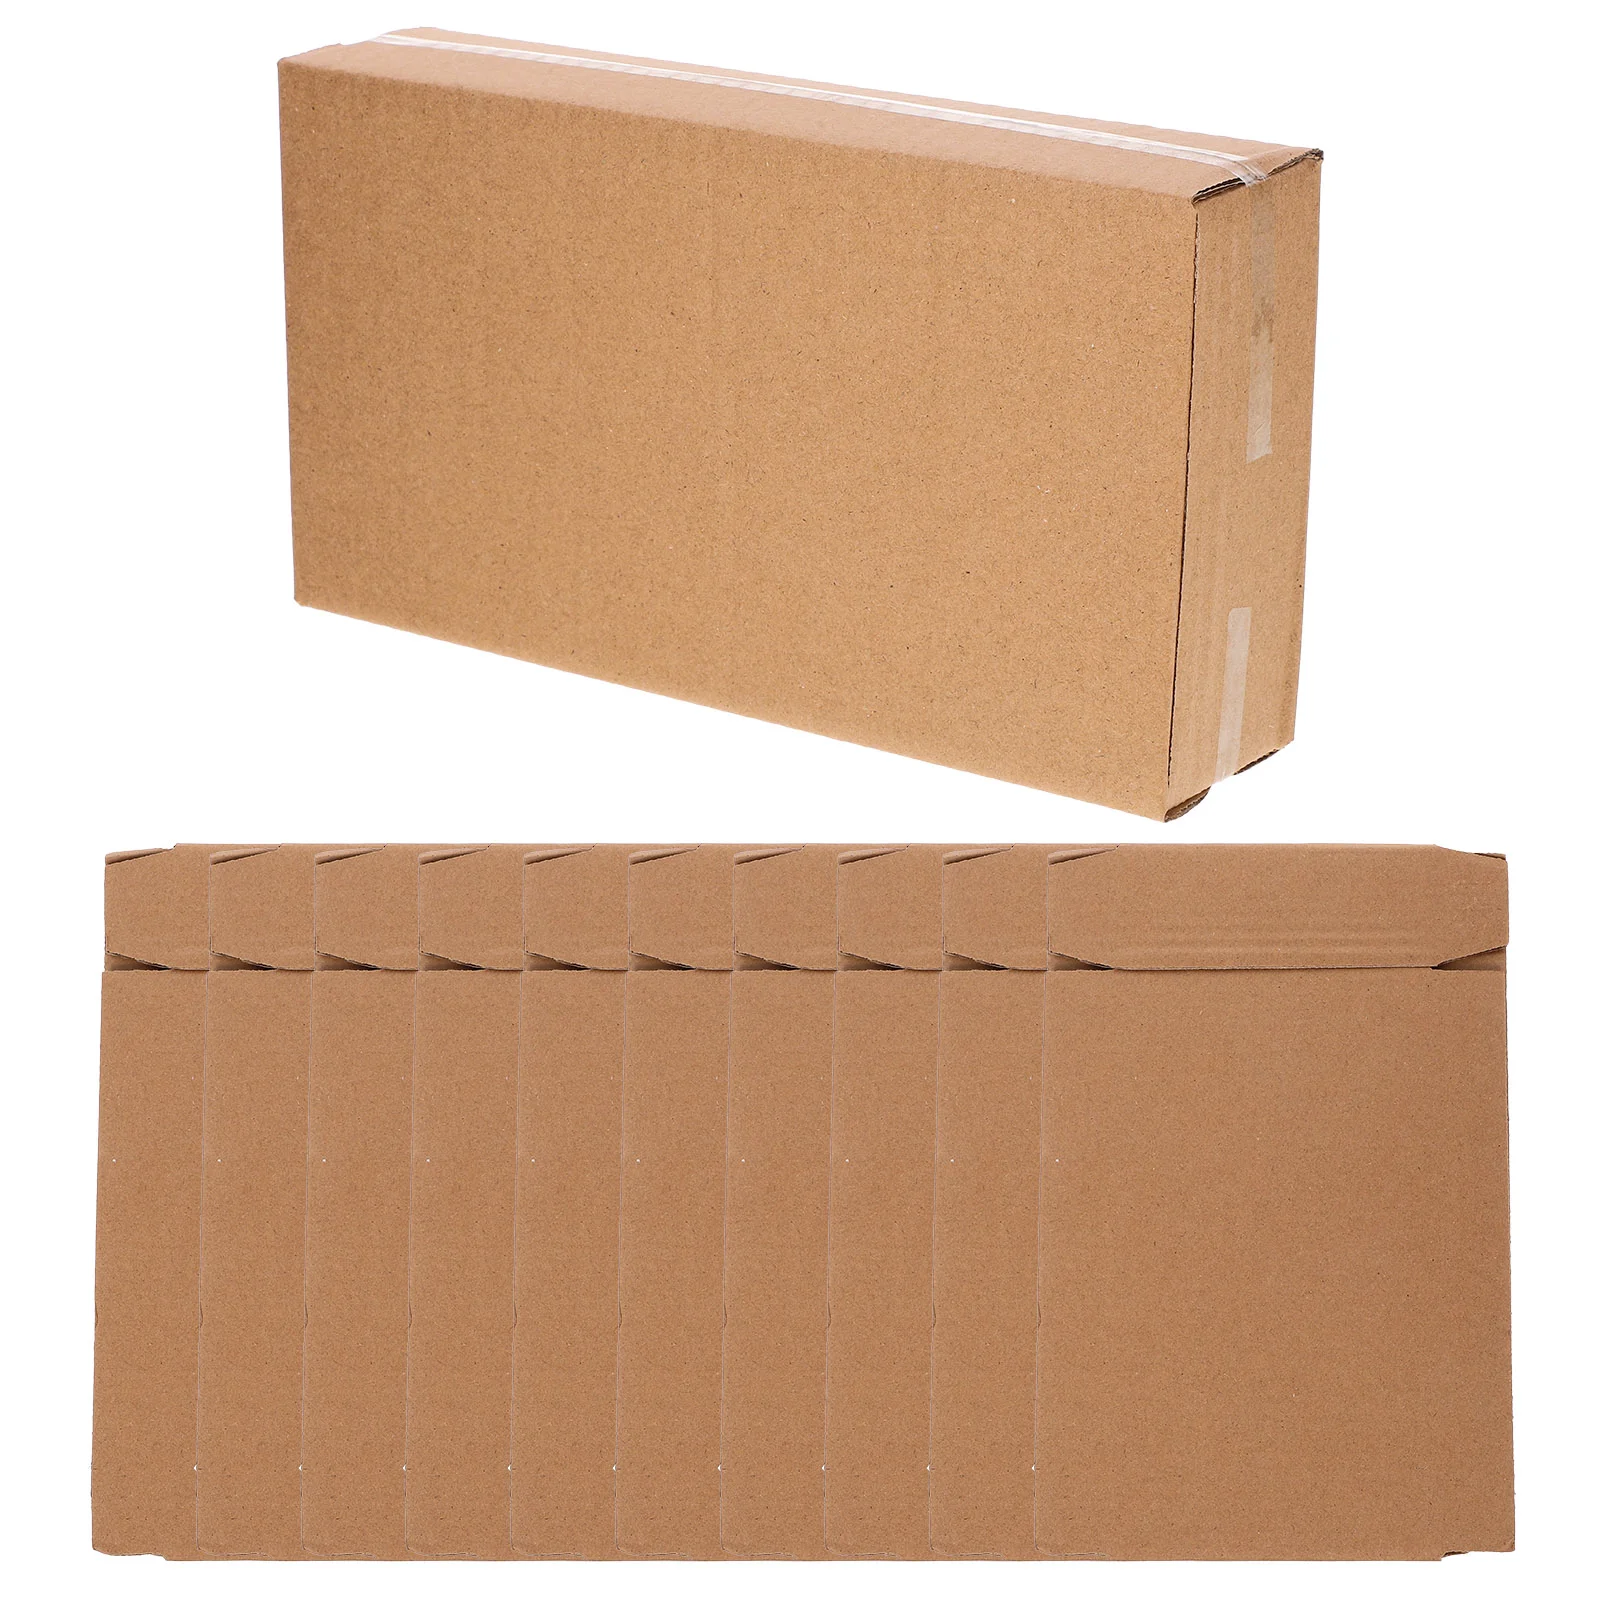 

10pcs Corrugated Board Package Boxes Multi-purpose Shipping Boxes Storage Boxes Thickened Boxes